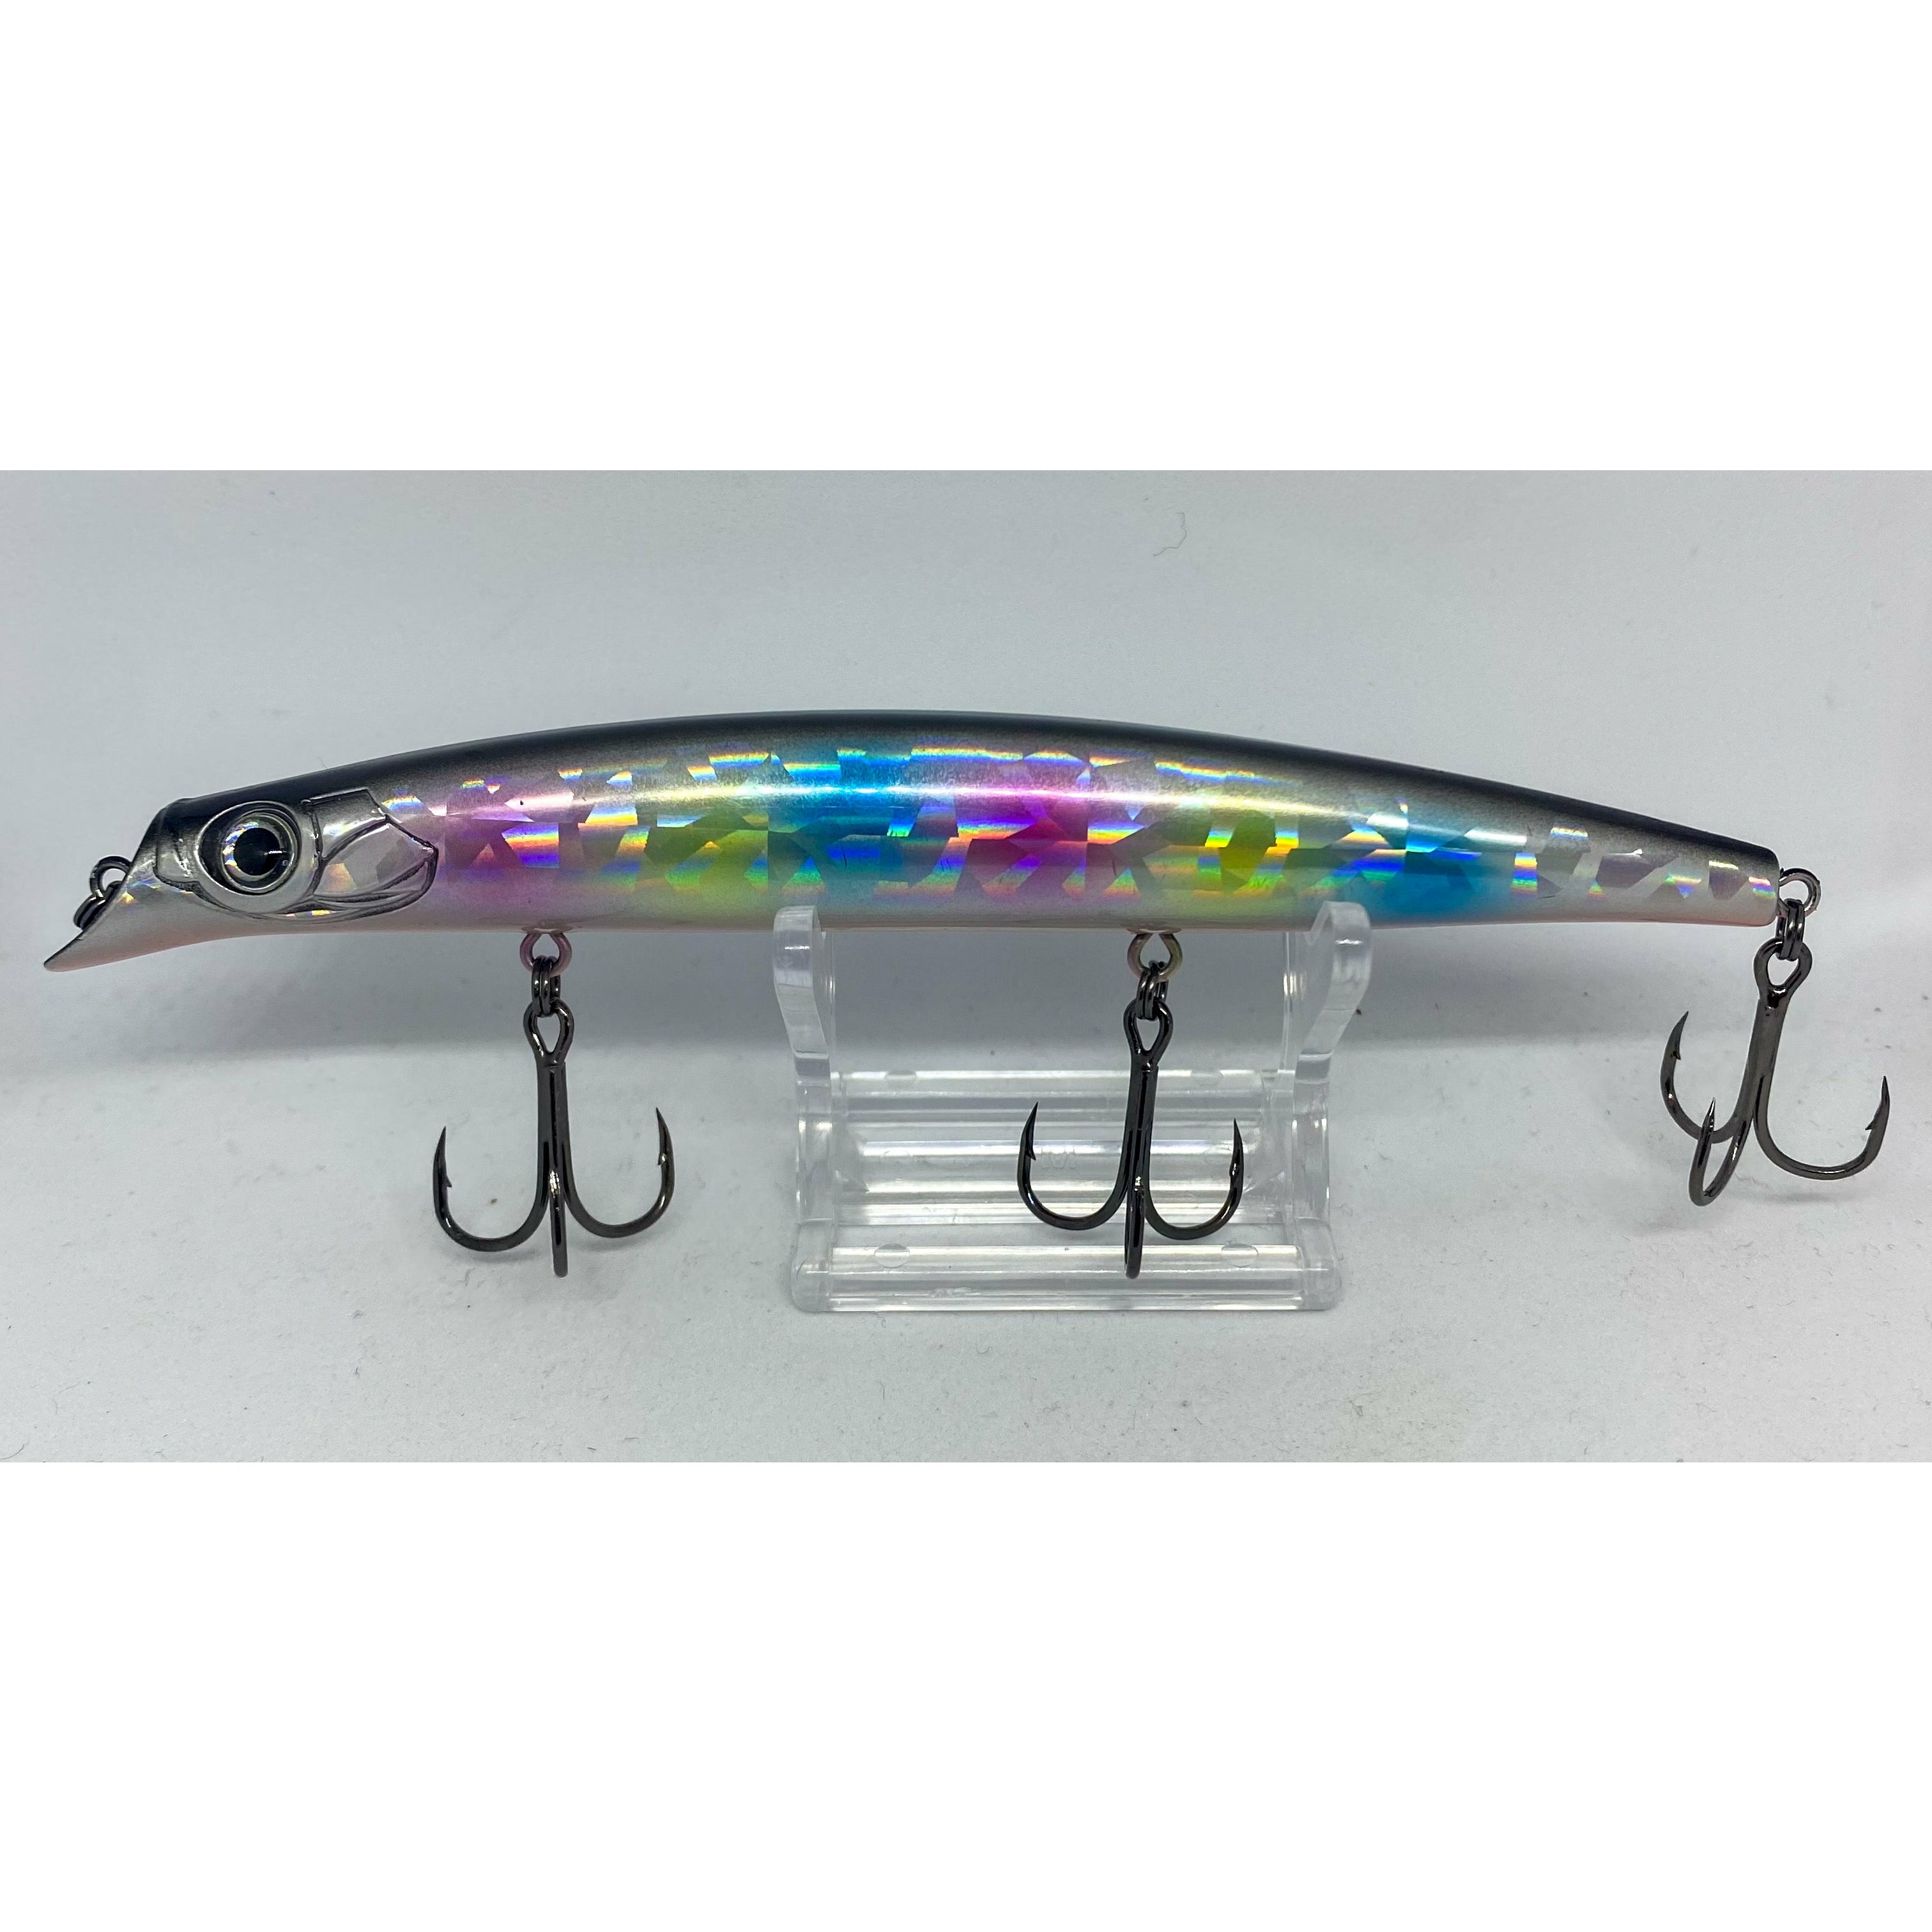 Large Shallow Diving 1m Bass Lure 140mm 18g